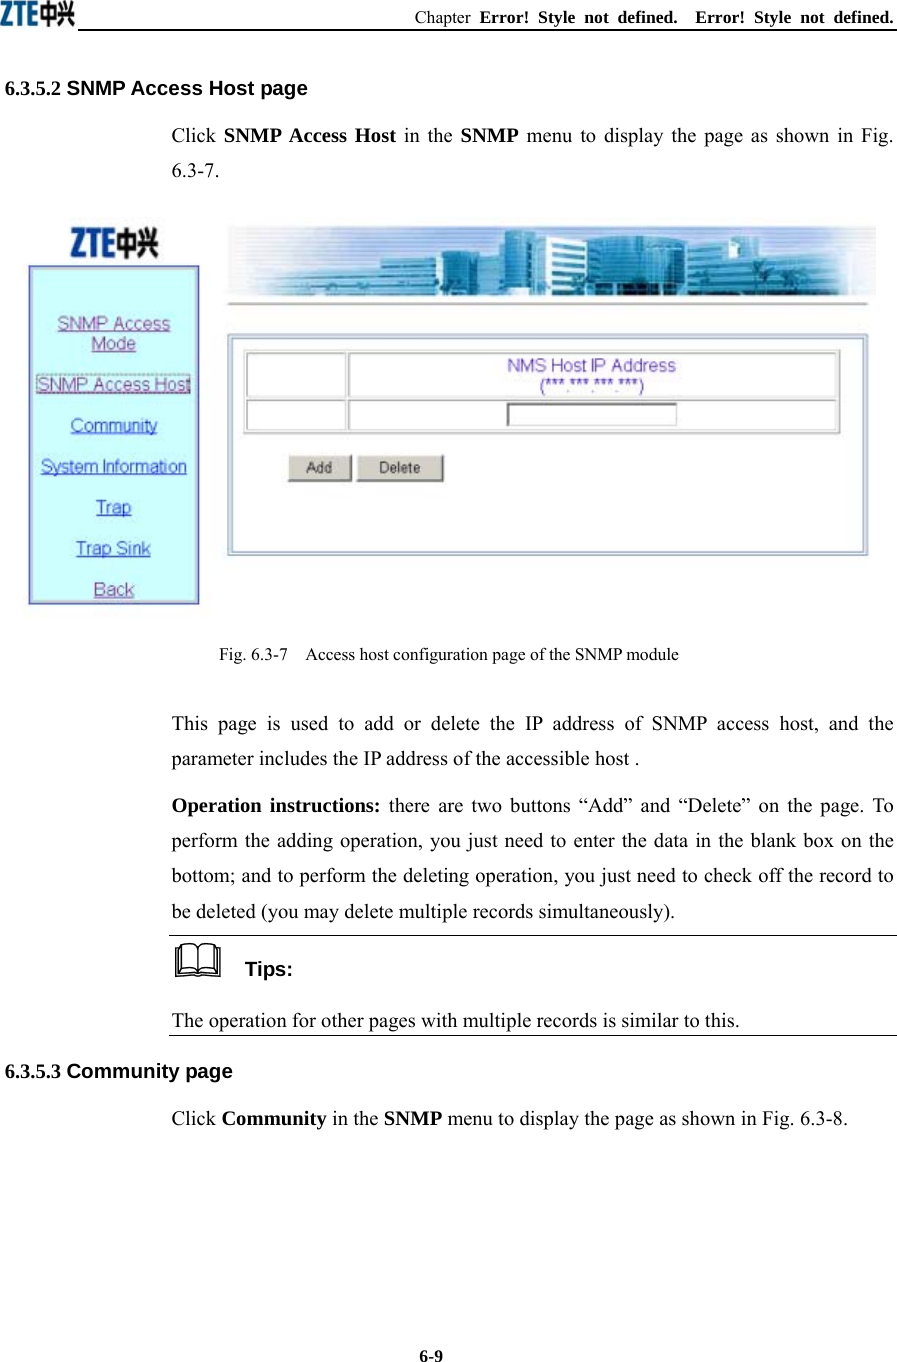 Chapter  Error! Style not defined.  Error! Style not defined.  6-9 6.3.5.2 SNMP Access Host page Click  SNMP Access Host in the SNMP menu to display the page as shown in Fig. 6.3-7.  Fig. 6.3-7    Access host configuration page of the SNMP module This page is used to add or delete the IP address of SNMP access host, and the parameter includes the IP address of the accessible host . Operation instructions: there are two buttons “Add” and “Delete” on the page. To perform the adding operation, you just need to enter the data in the blank box on the bottom; and to perform the deleting operation, you just need to check off the record to be deleted (you may delete multiple records simultaneously).     Tips:  The operation for other pages with multiple records is similar to this. 6.3.5.3 Community page Click Community in the SNMP menu to display the page as shown in Fig. 6.3-8. 